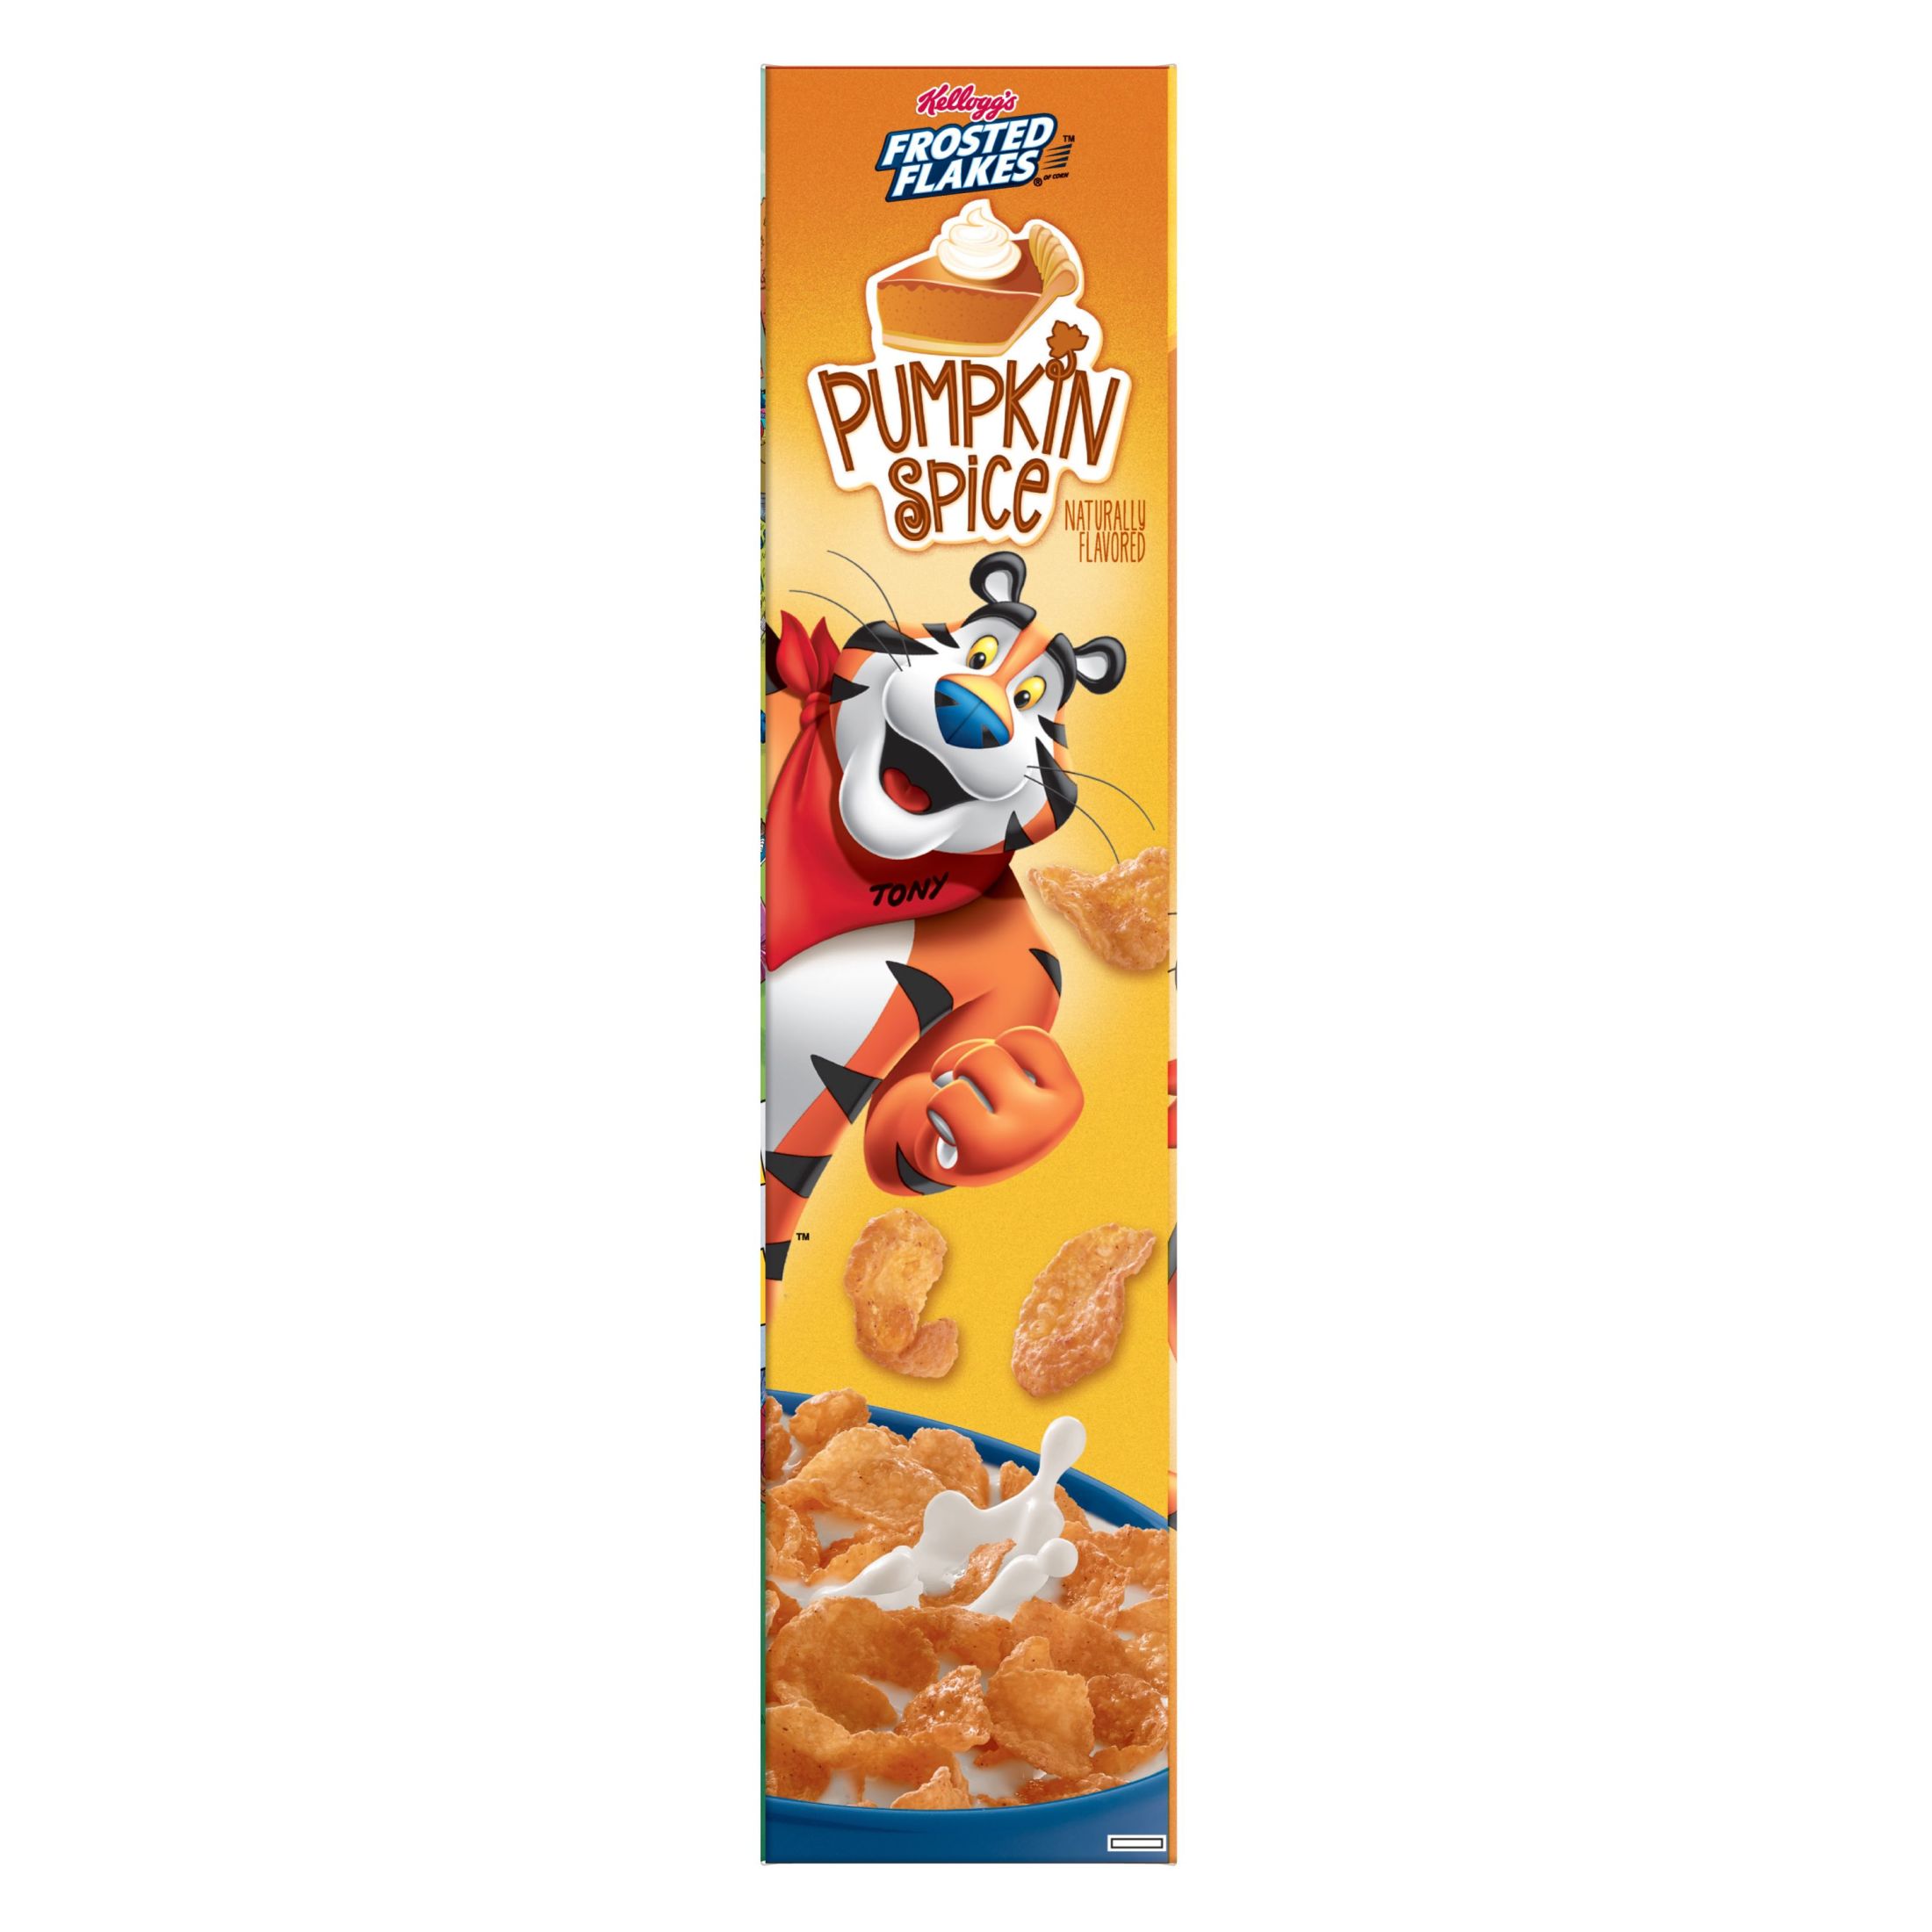 Kellogg's Frosted Flakes Pumpkin Spice Cold Breakfast Cereal, Family Size, 24 oz Box - image 5 of 8